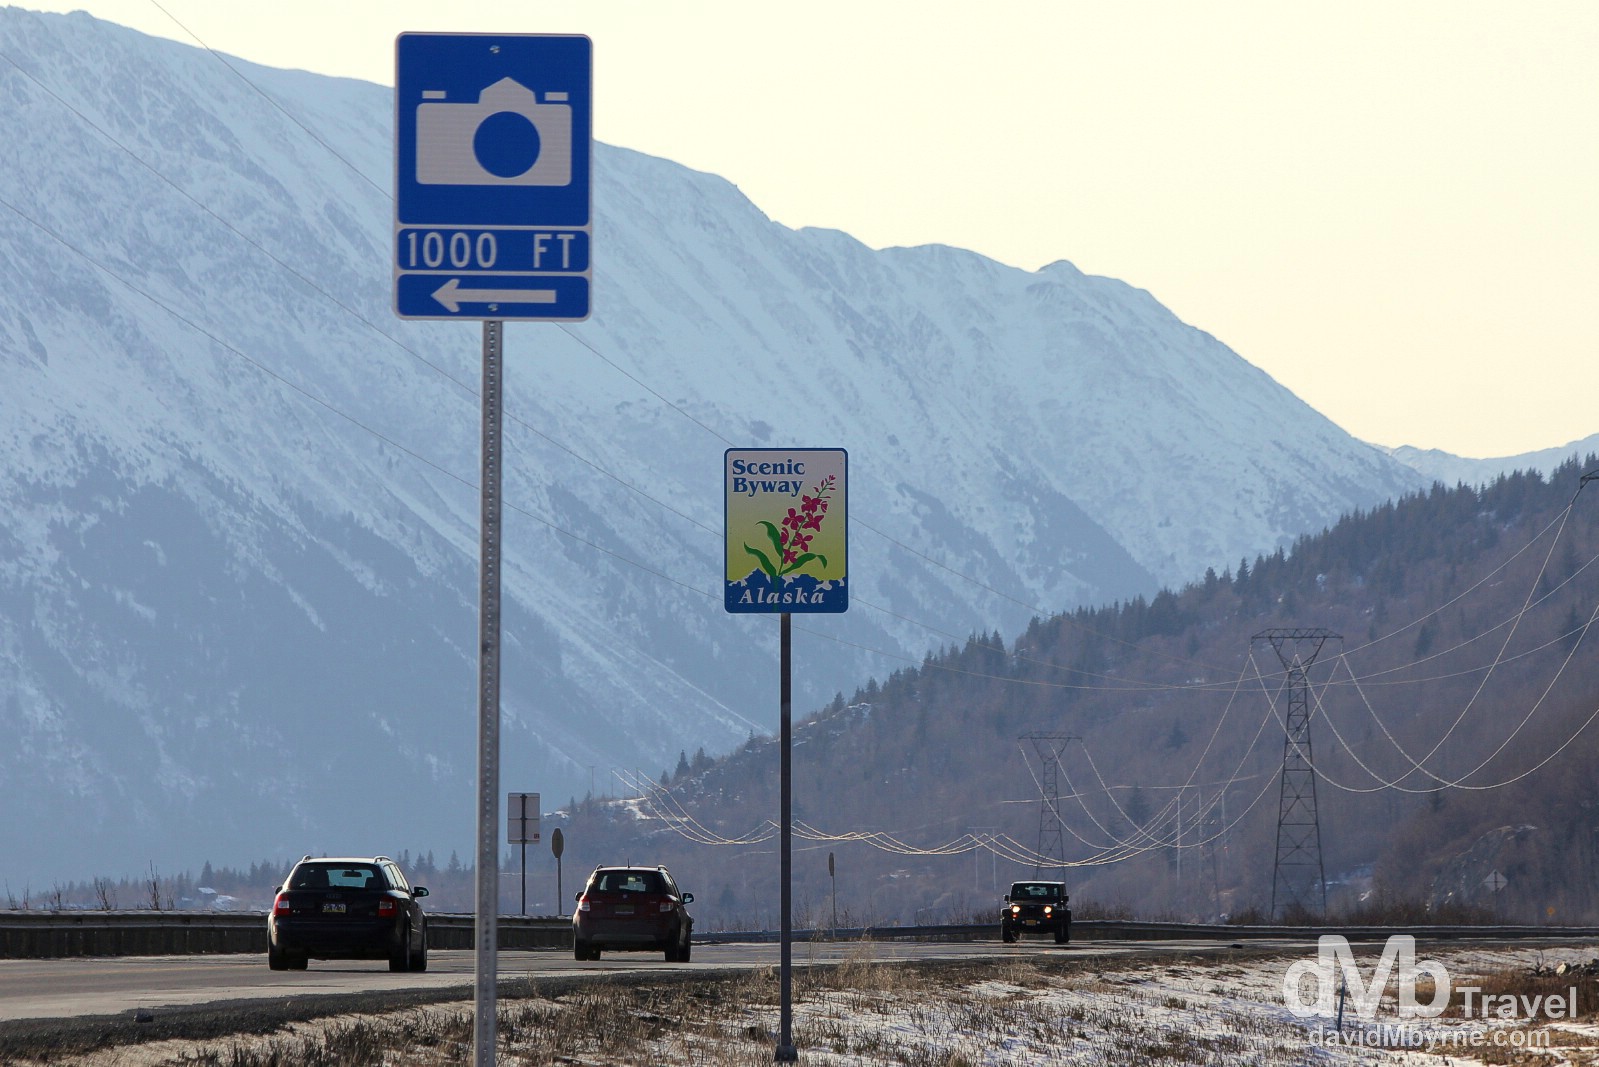 Roadside signage proves advanced warning for upcoming scenic viewpoints. I must have hit most of these scenic vista points while driving both the Seward & Sterling Highways on Alaska's Kenai Peninsula. This particular sign is on the Seward Highway not too far from Anchorage. Alaska, USA. March 18th 2013.